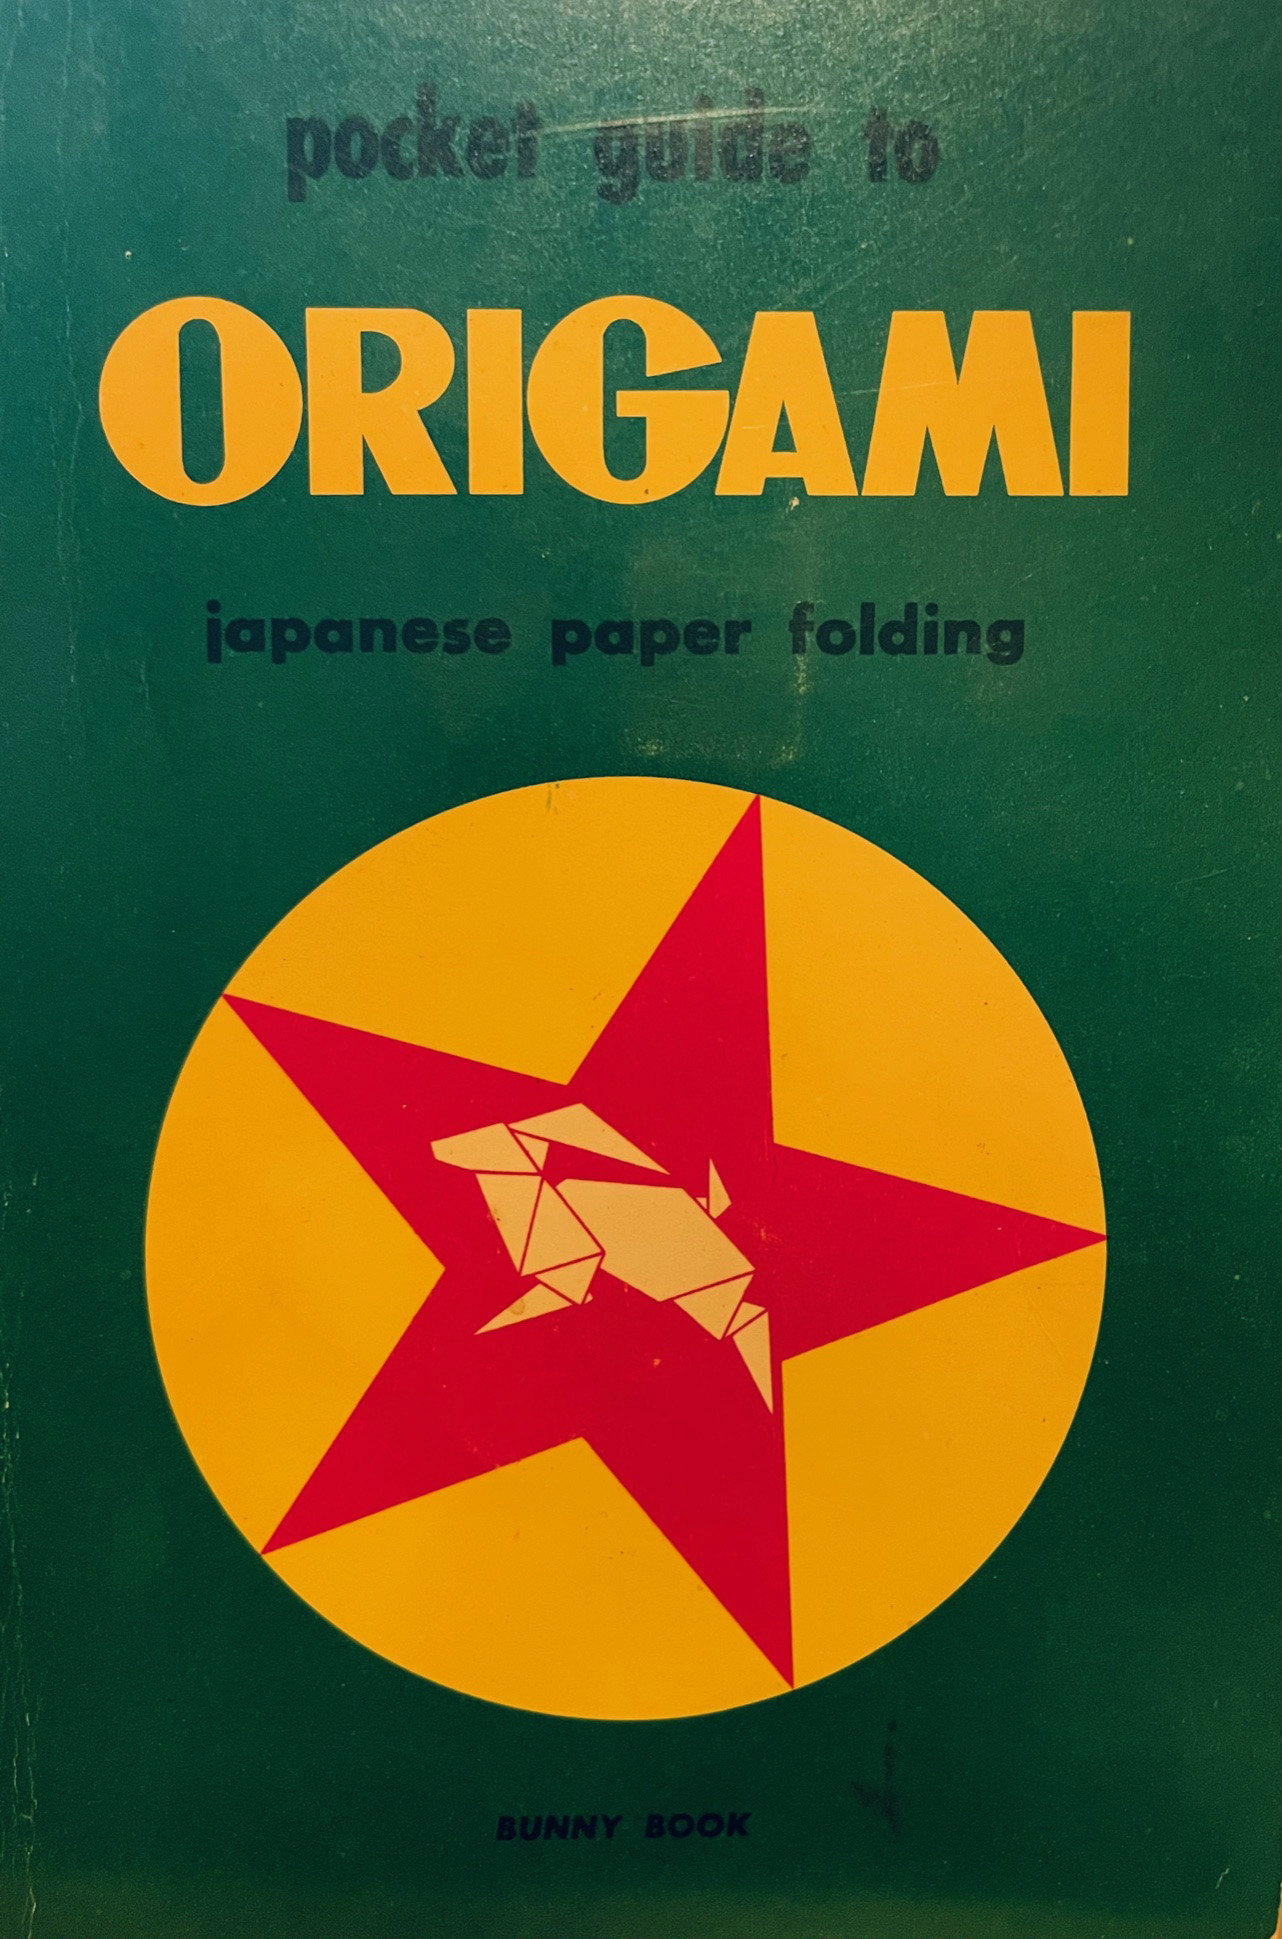 Pocket Guide to Origami - Bunny Book : page 15.